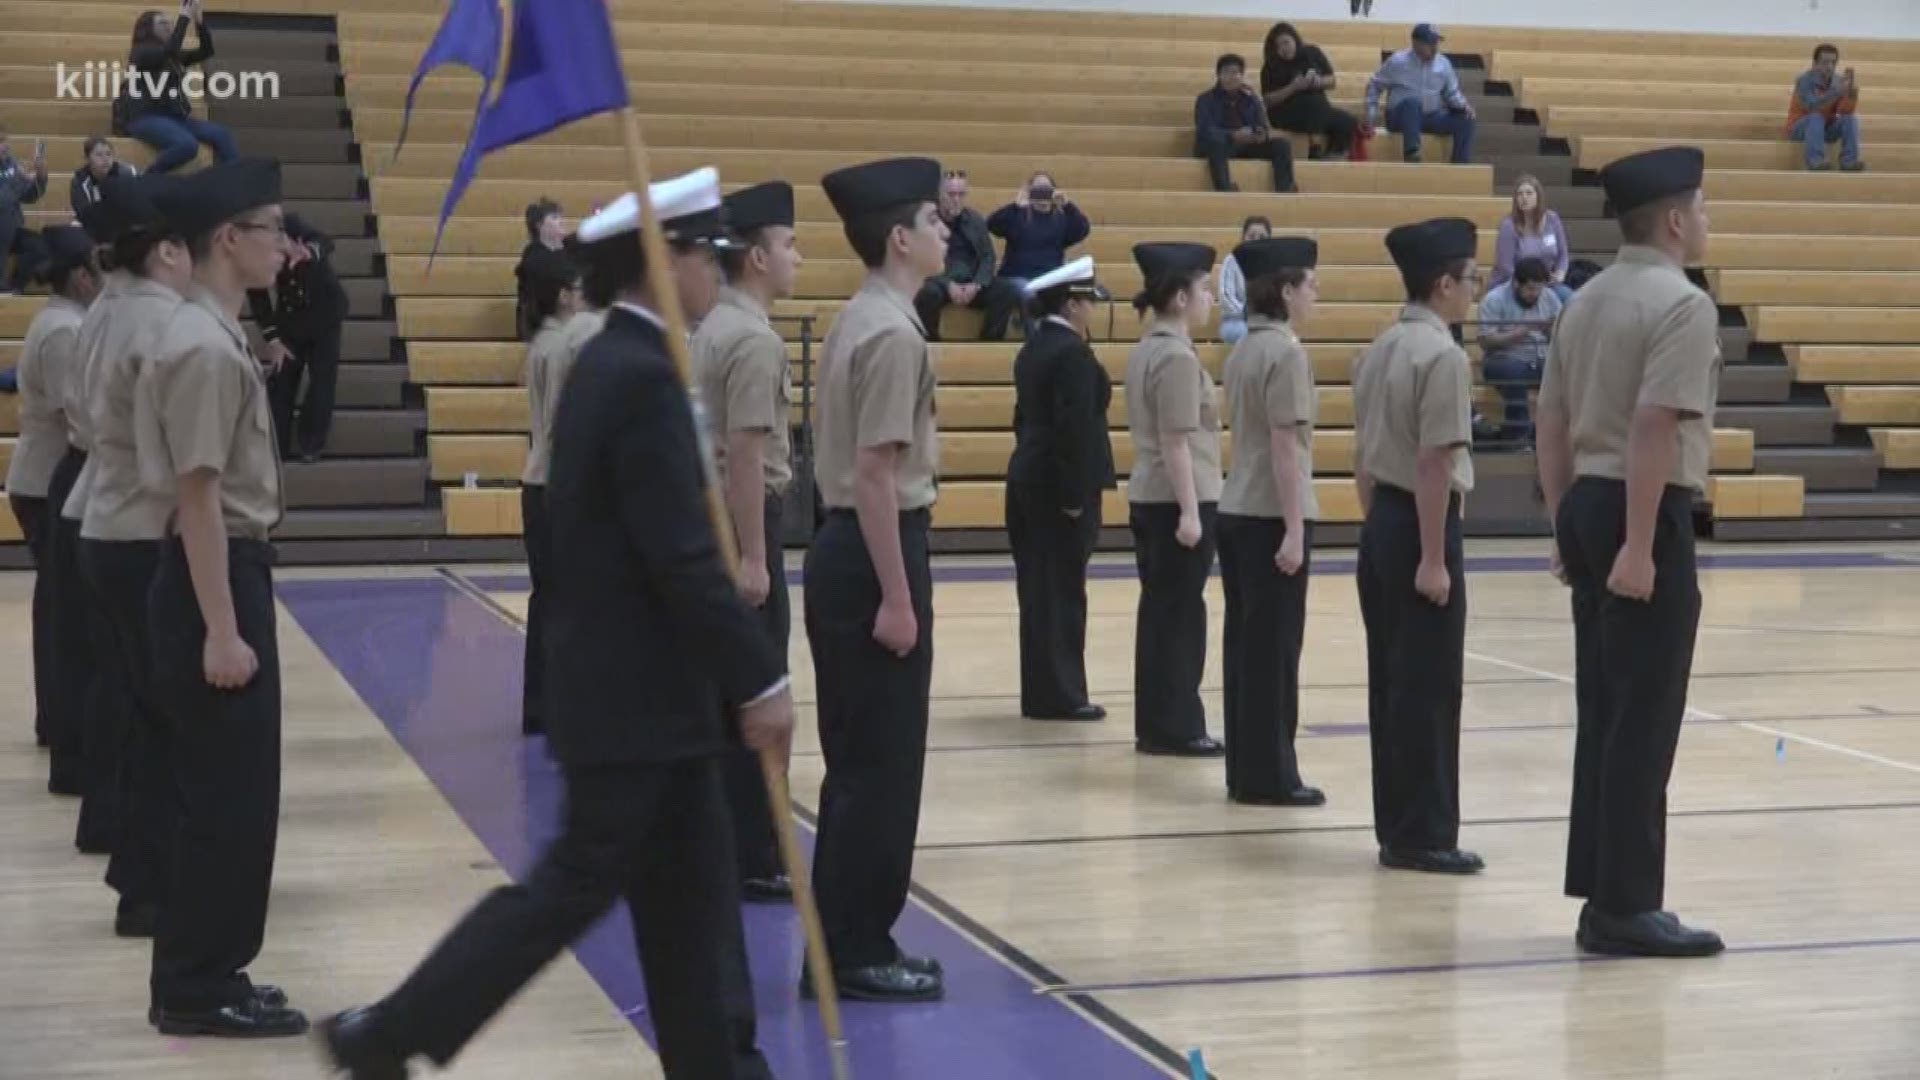 Miller High School students got a taste of the real world when military officials paid NJROTC students a visit for their annual inspection.